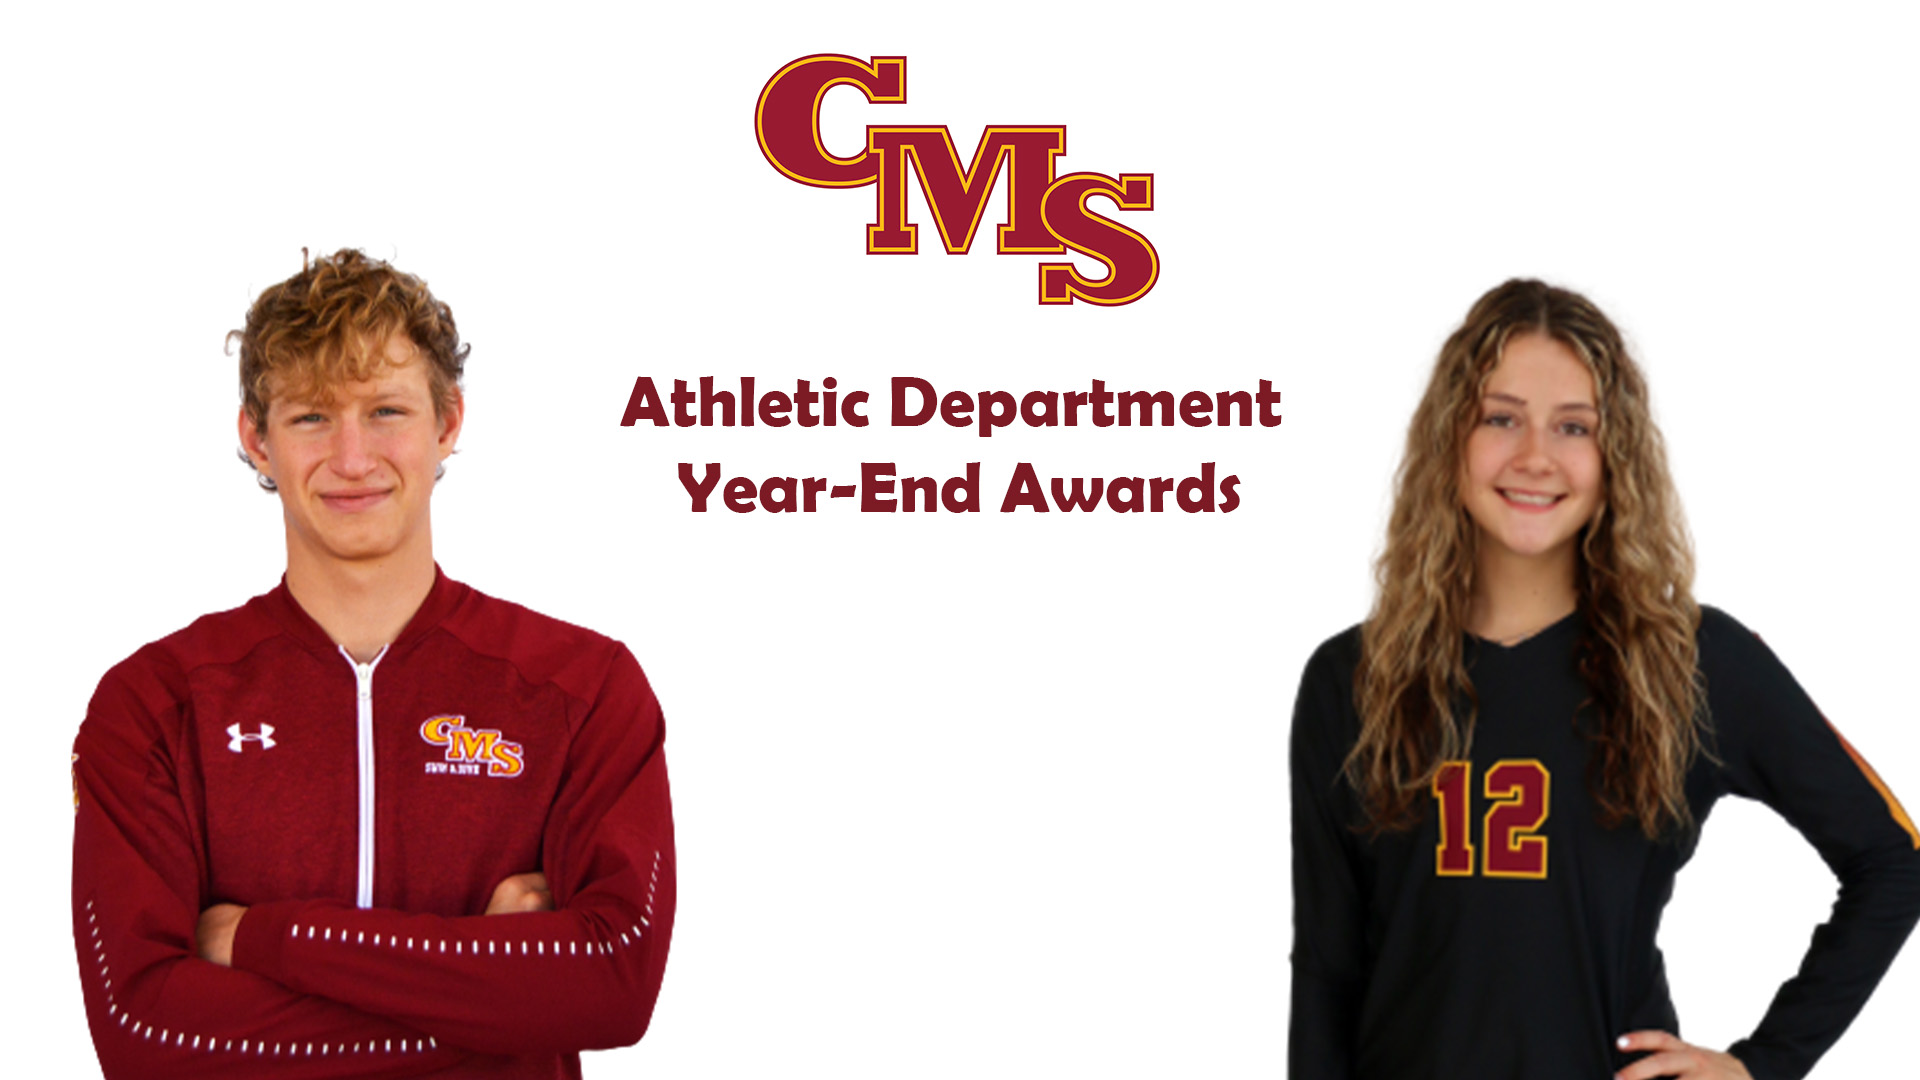 Frank Applebaum (l) and Jenna Holmes (r) were CMS Athletes of the Year